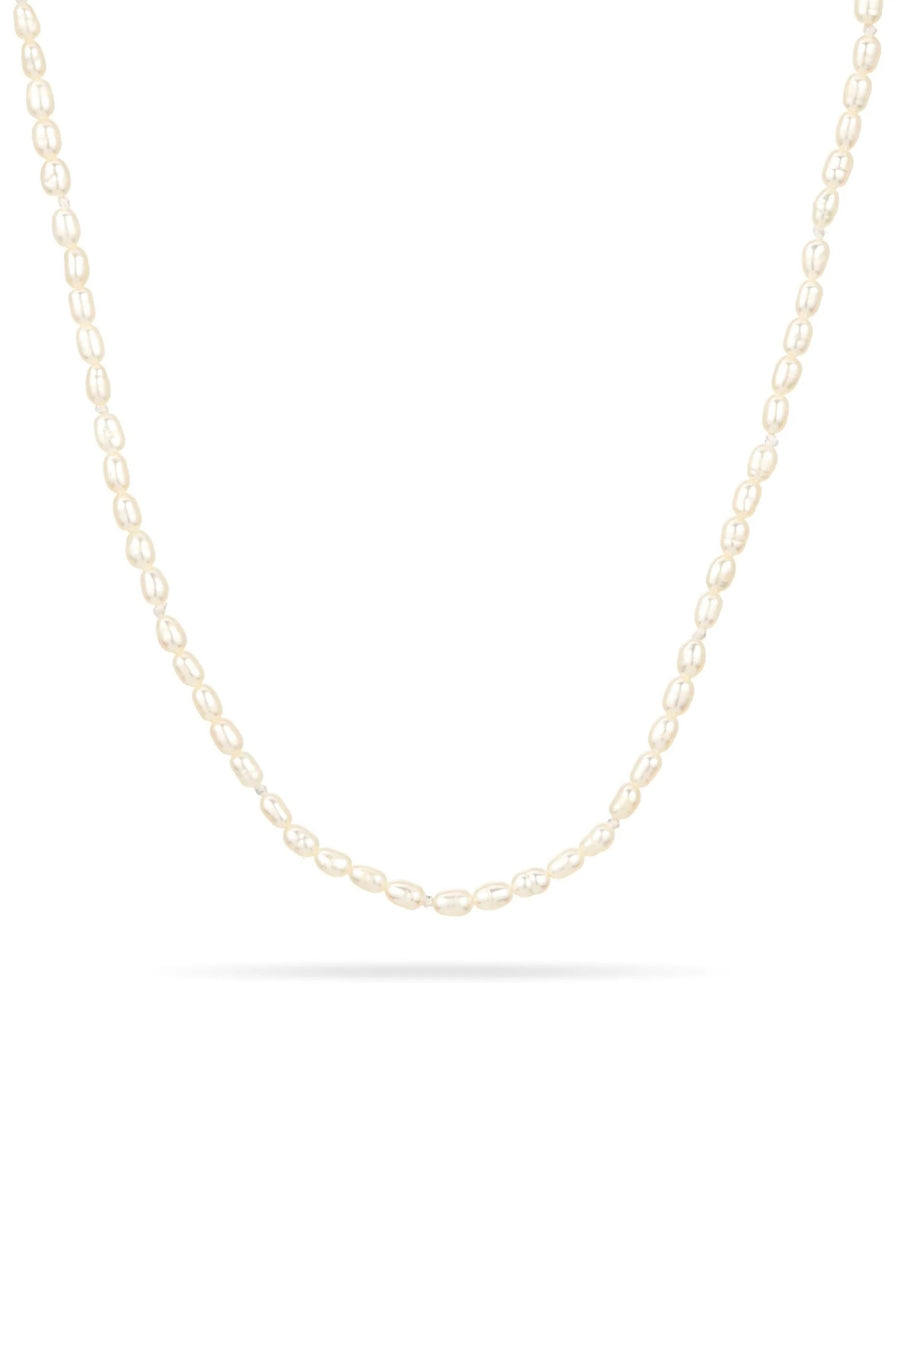 Tiny Pearl Necklace,Bridesmaid Gifts – Aurora Queen